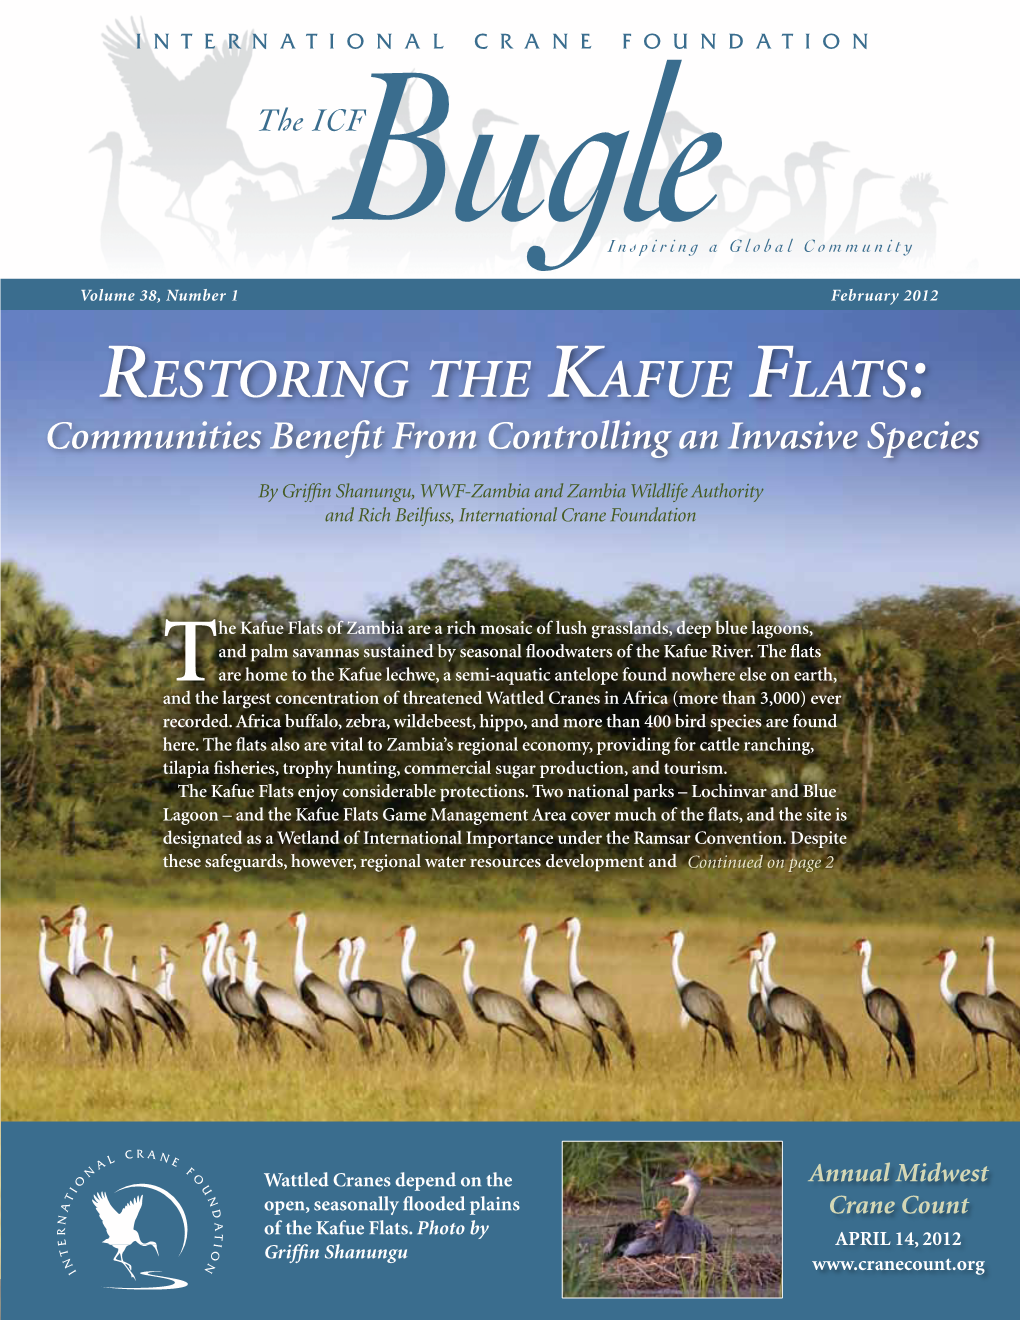 Restoring the Kafue Flats: Communities Benefit from Controlling an Invasive Species